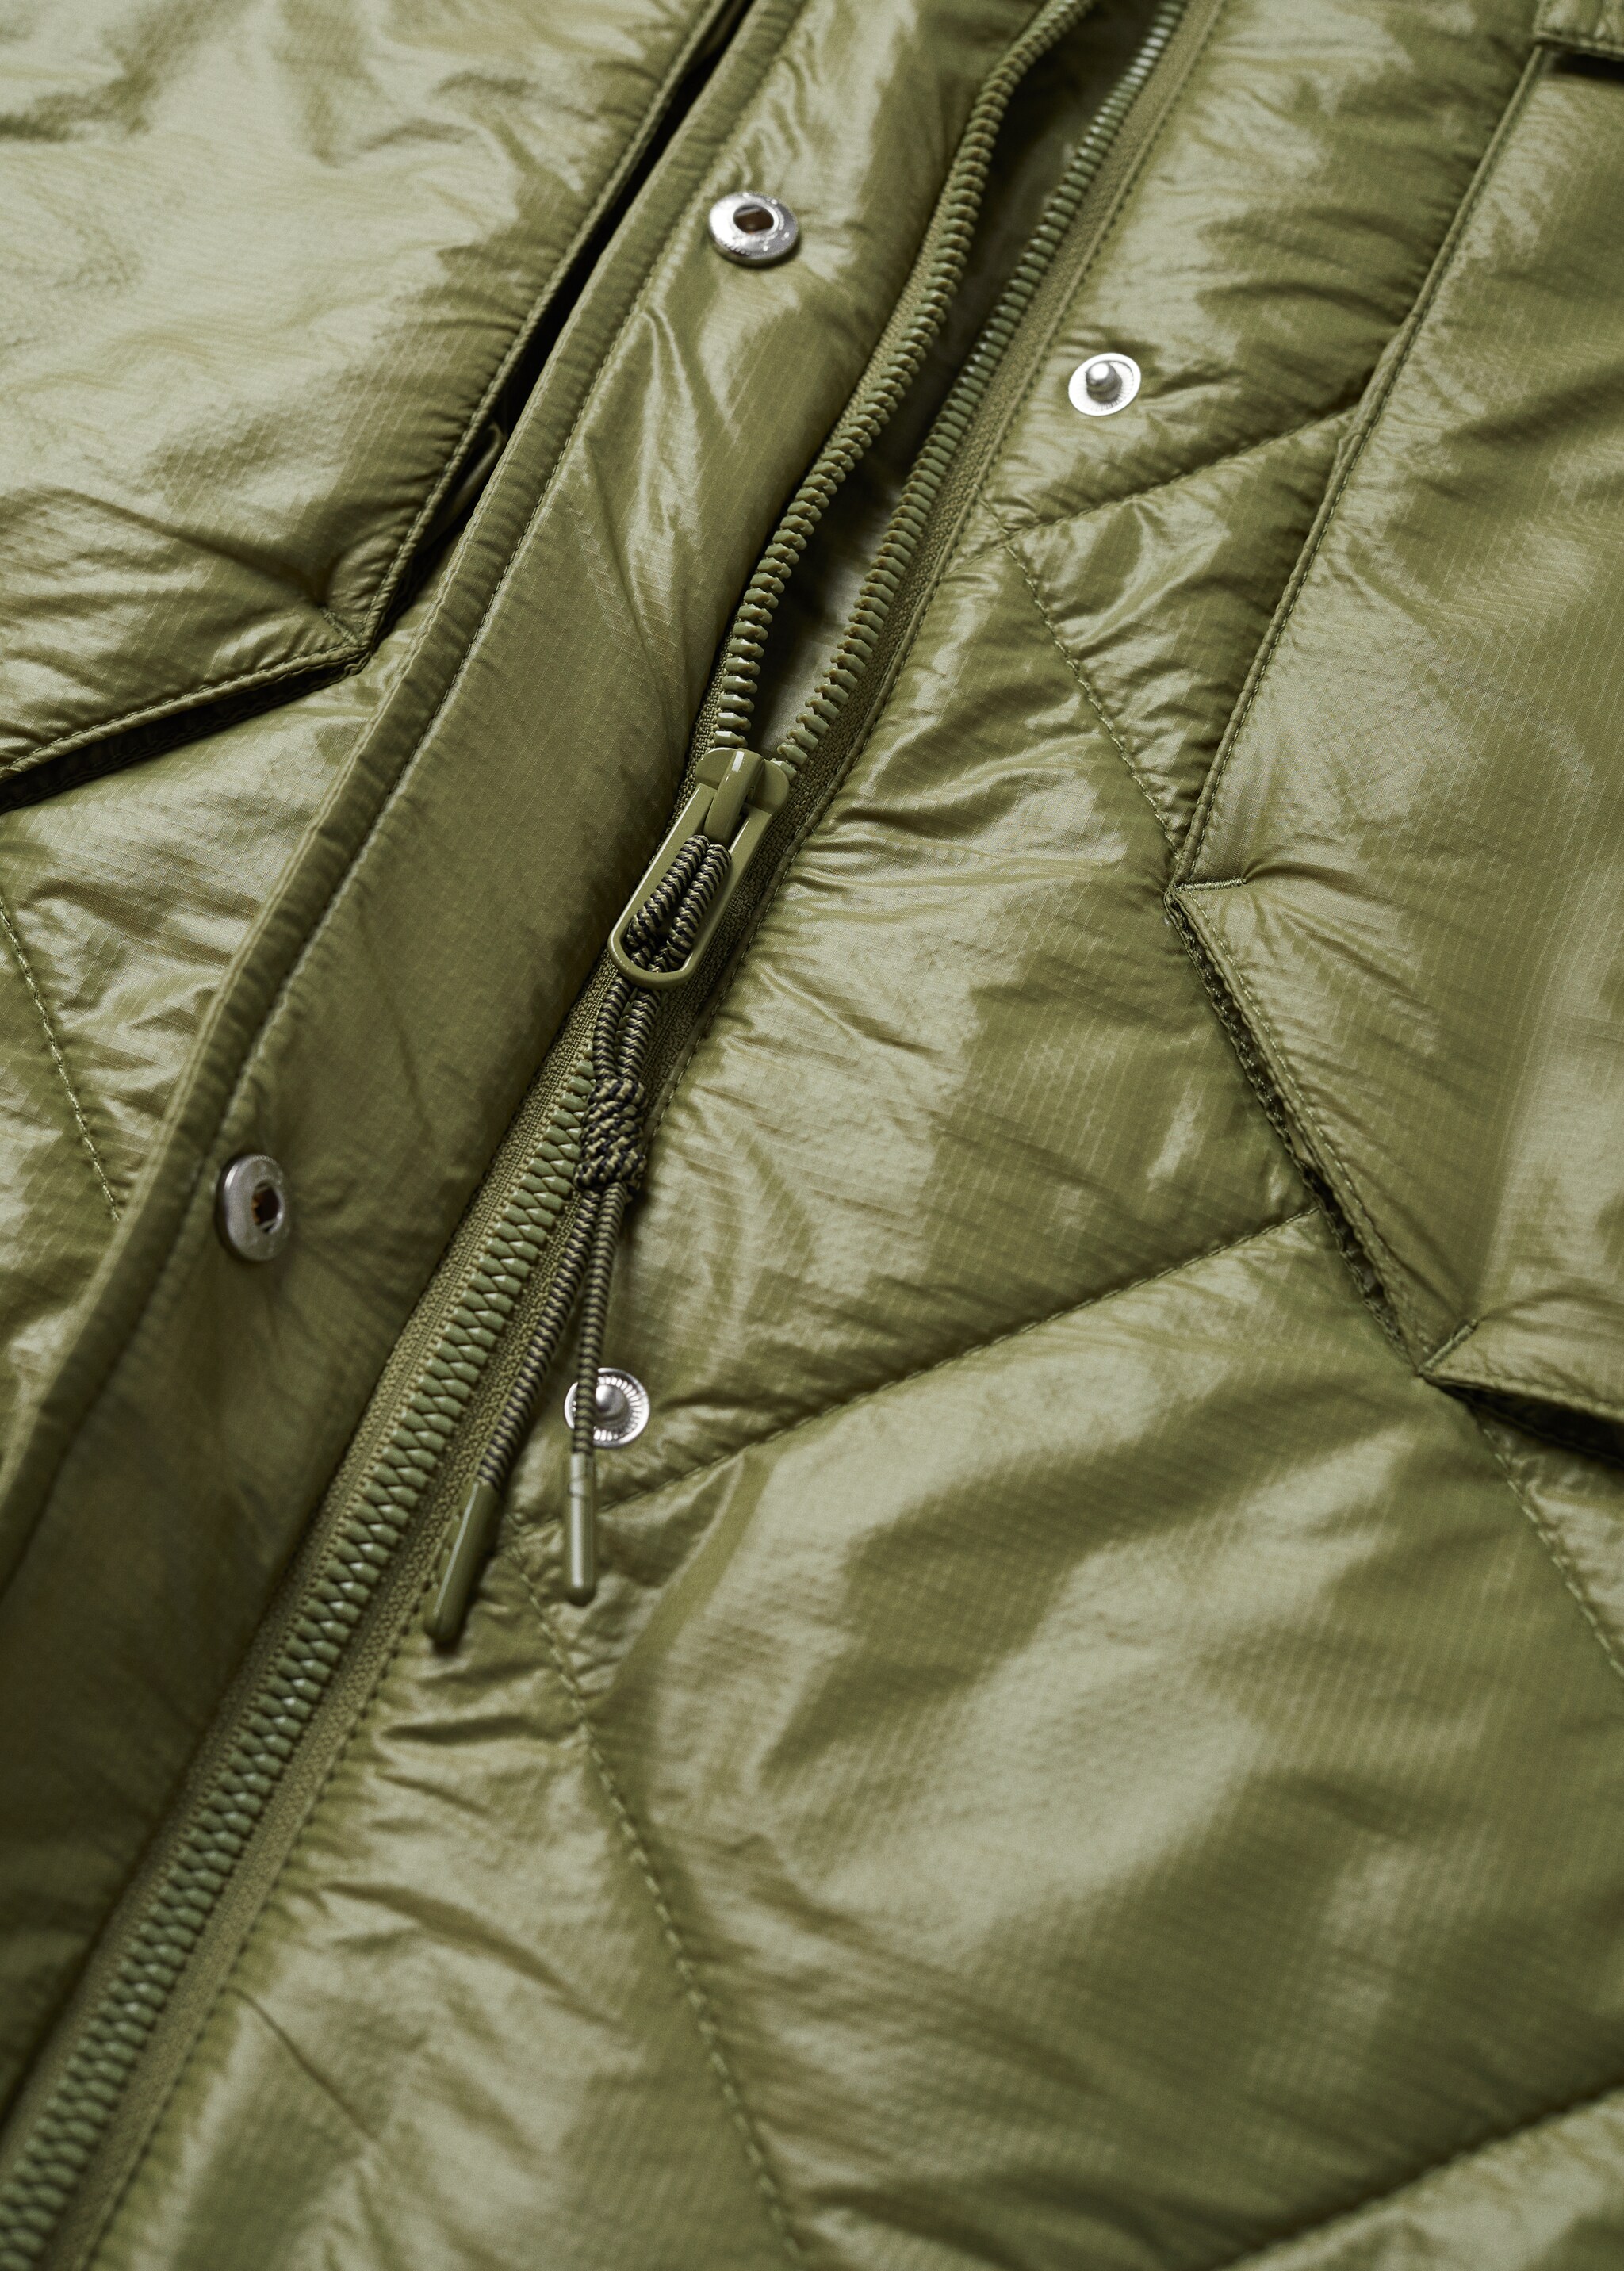 Ultralight quilted jacket - Details of the article 8